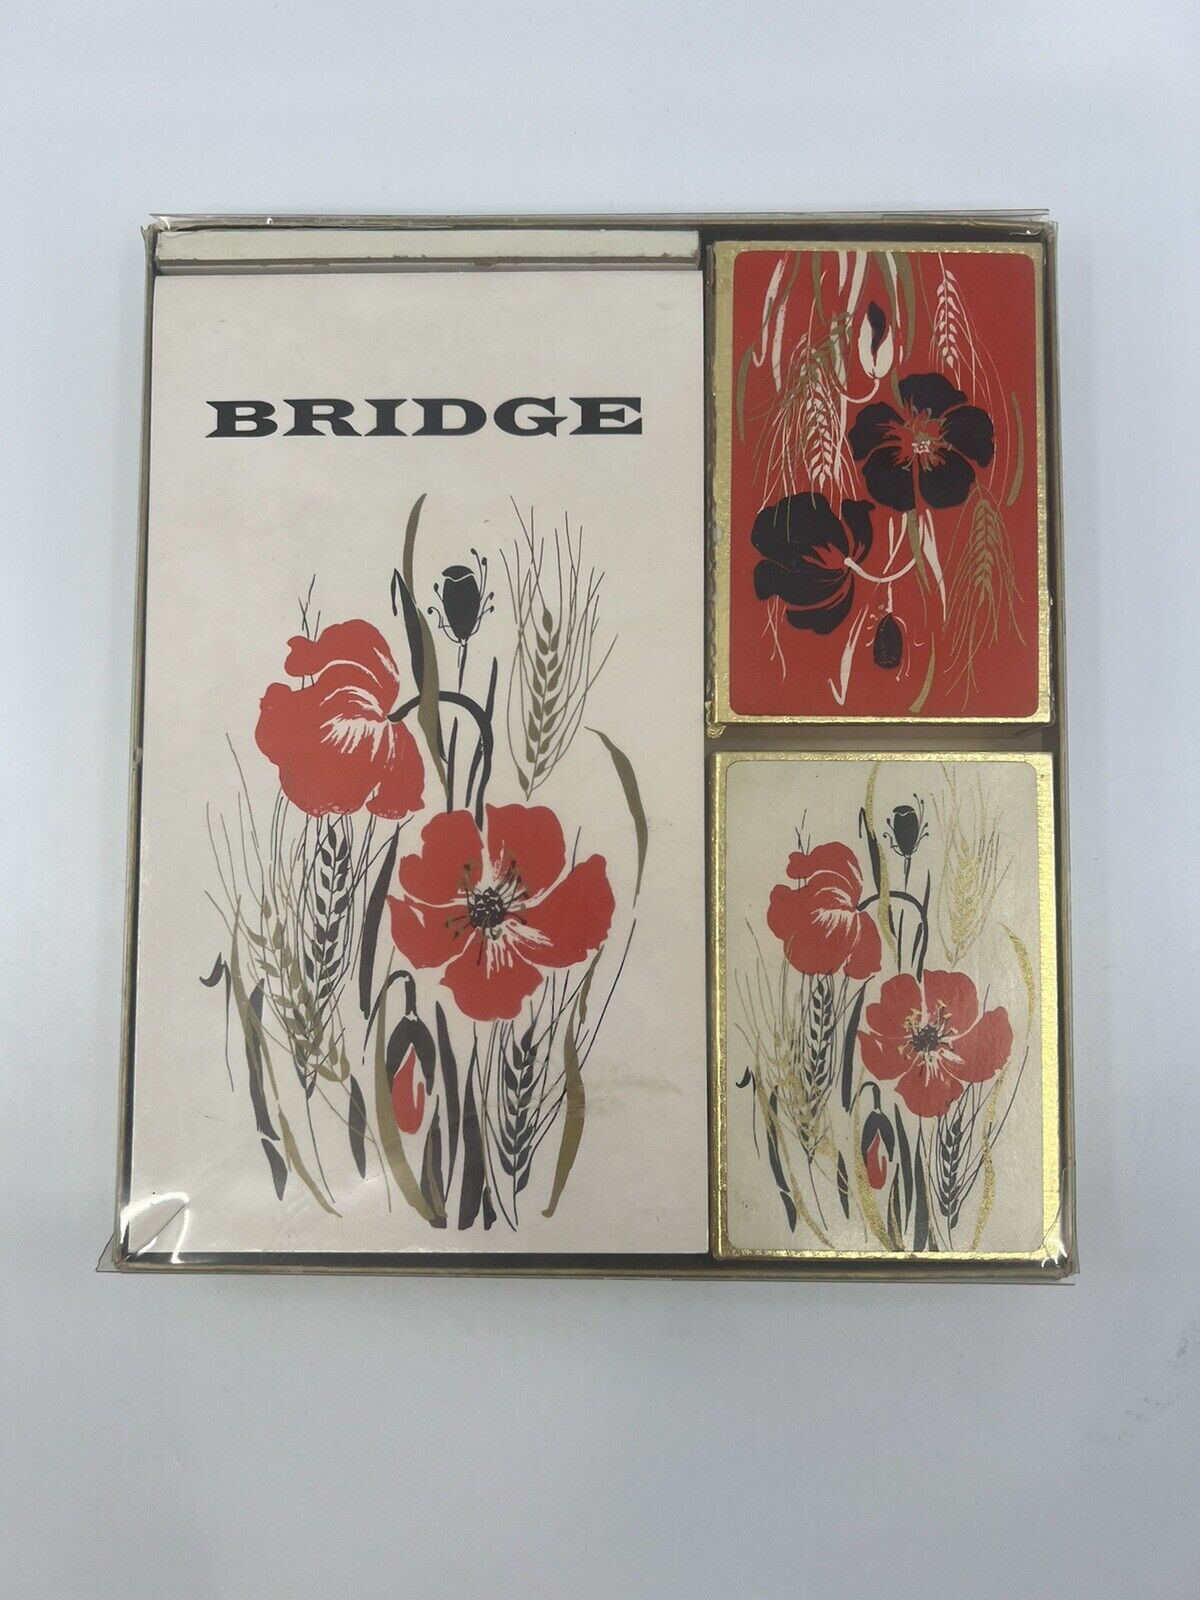 Vintage Royale Bridge Gift Set Party Pack 2 Decks Playing Cards Score Pad in Box